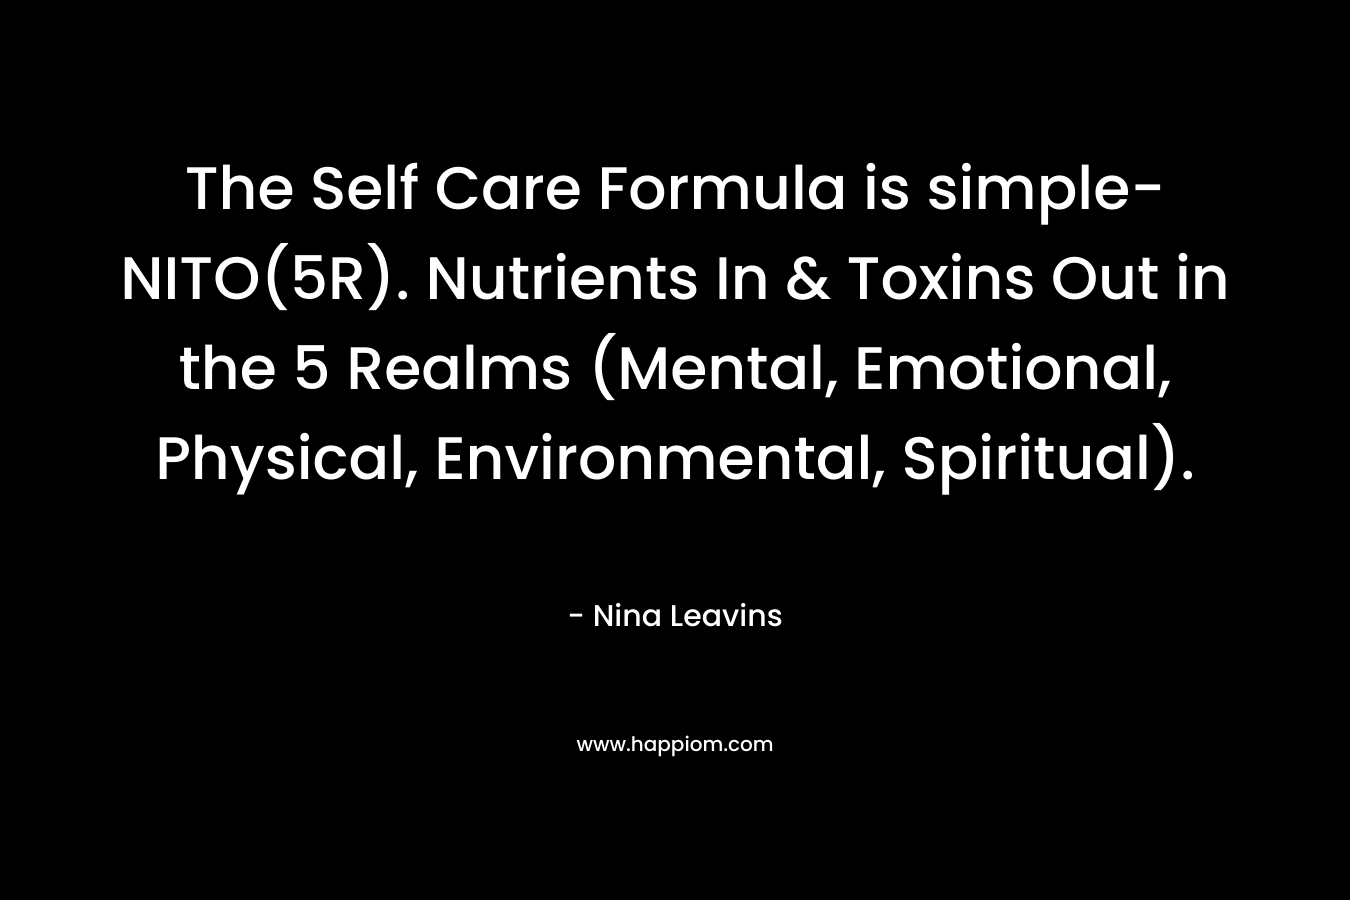 The Self Care Formula is simple-NITO(5R). Nutrients In & Toxins Out in the 5 Realms (Mental, Emotional, Physical, Environmental, Spiritual). – Nina Leavins